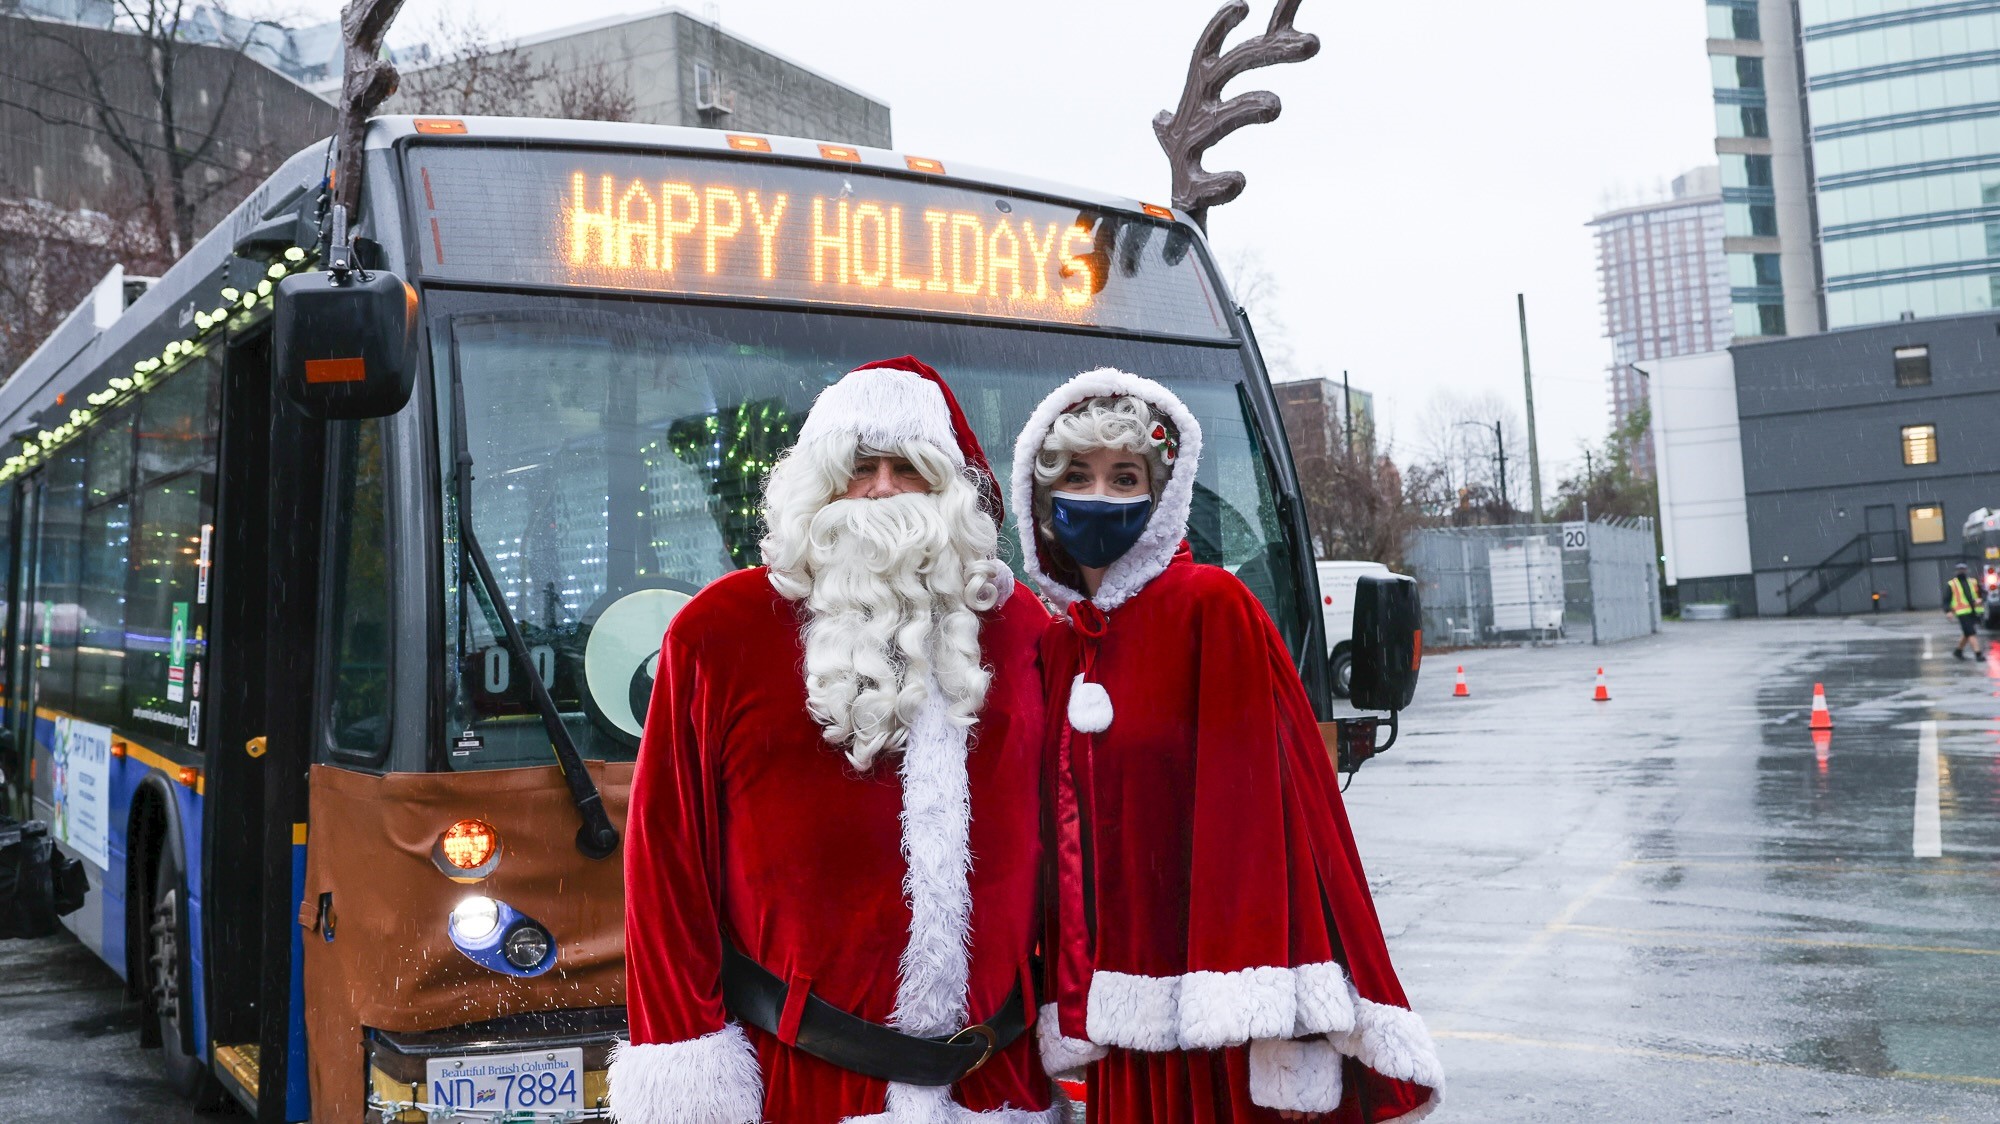 Santa Claus and Mrs Claus pose in front of a TransLink bus that is decorated as a Reindeer, with antlers and a destination sign that reads Happy Holidays